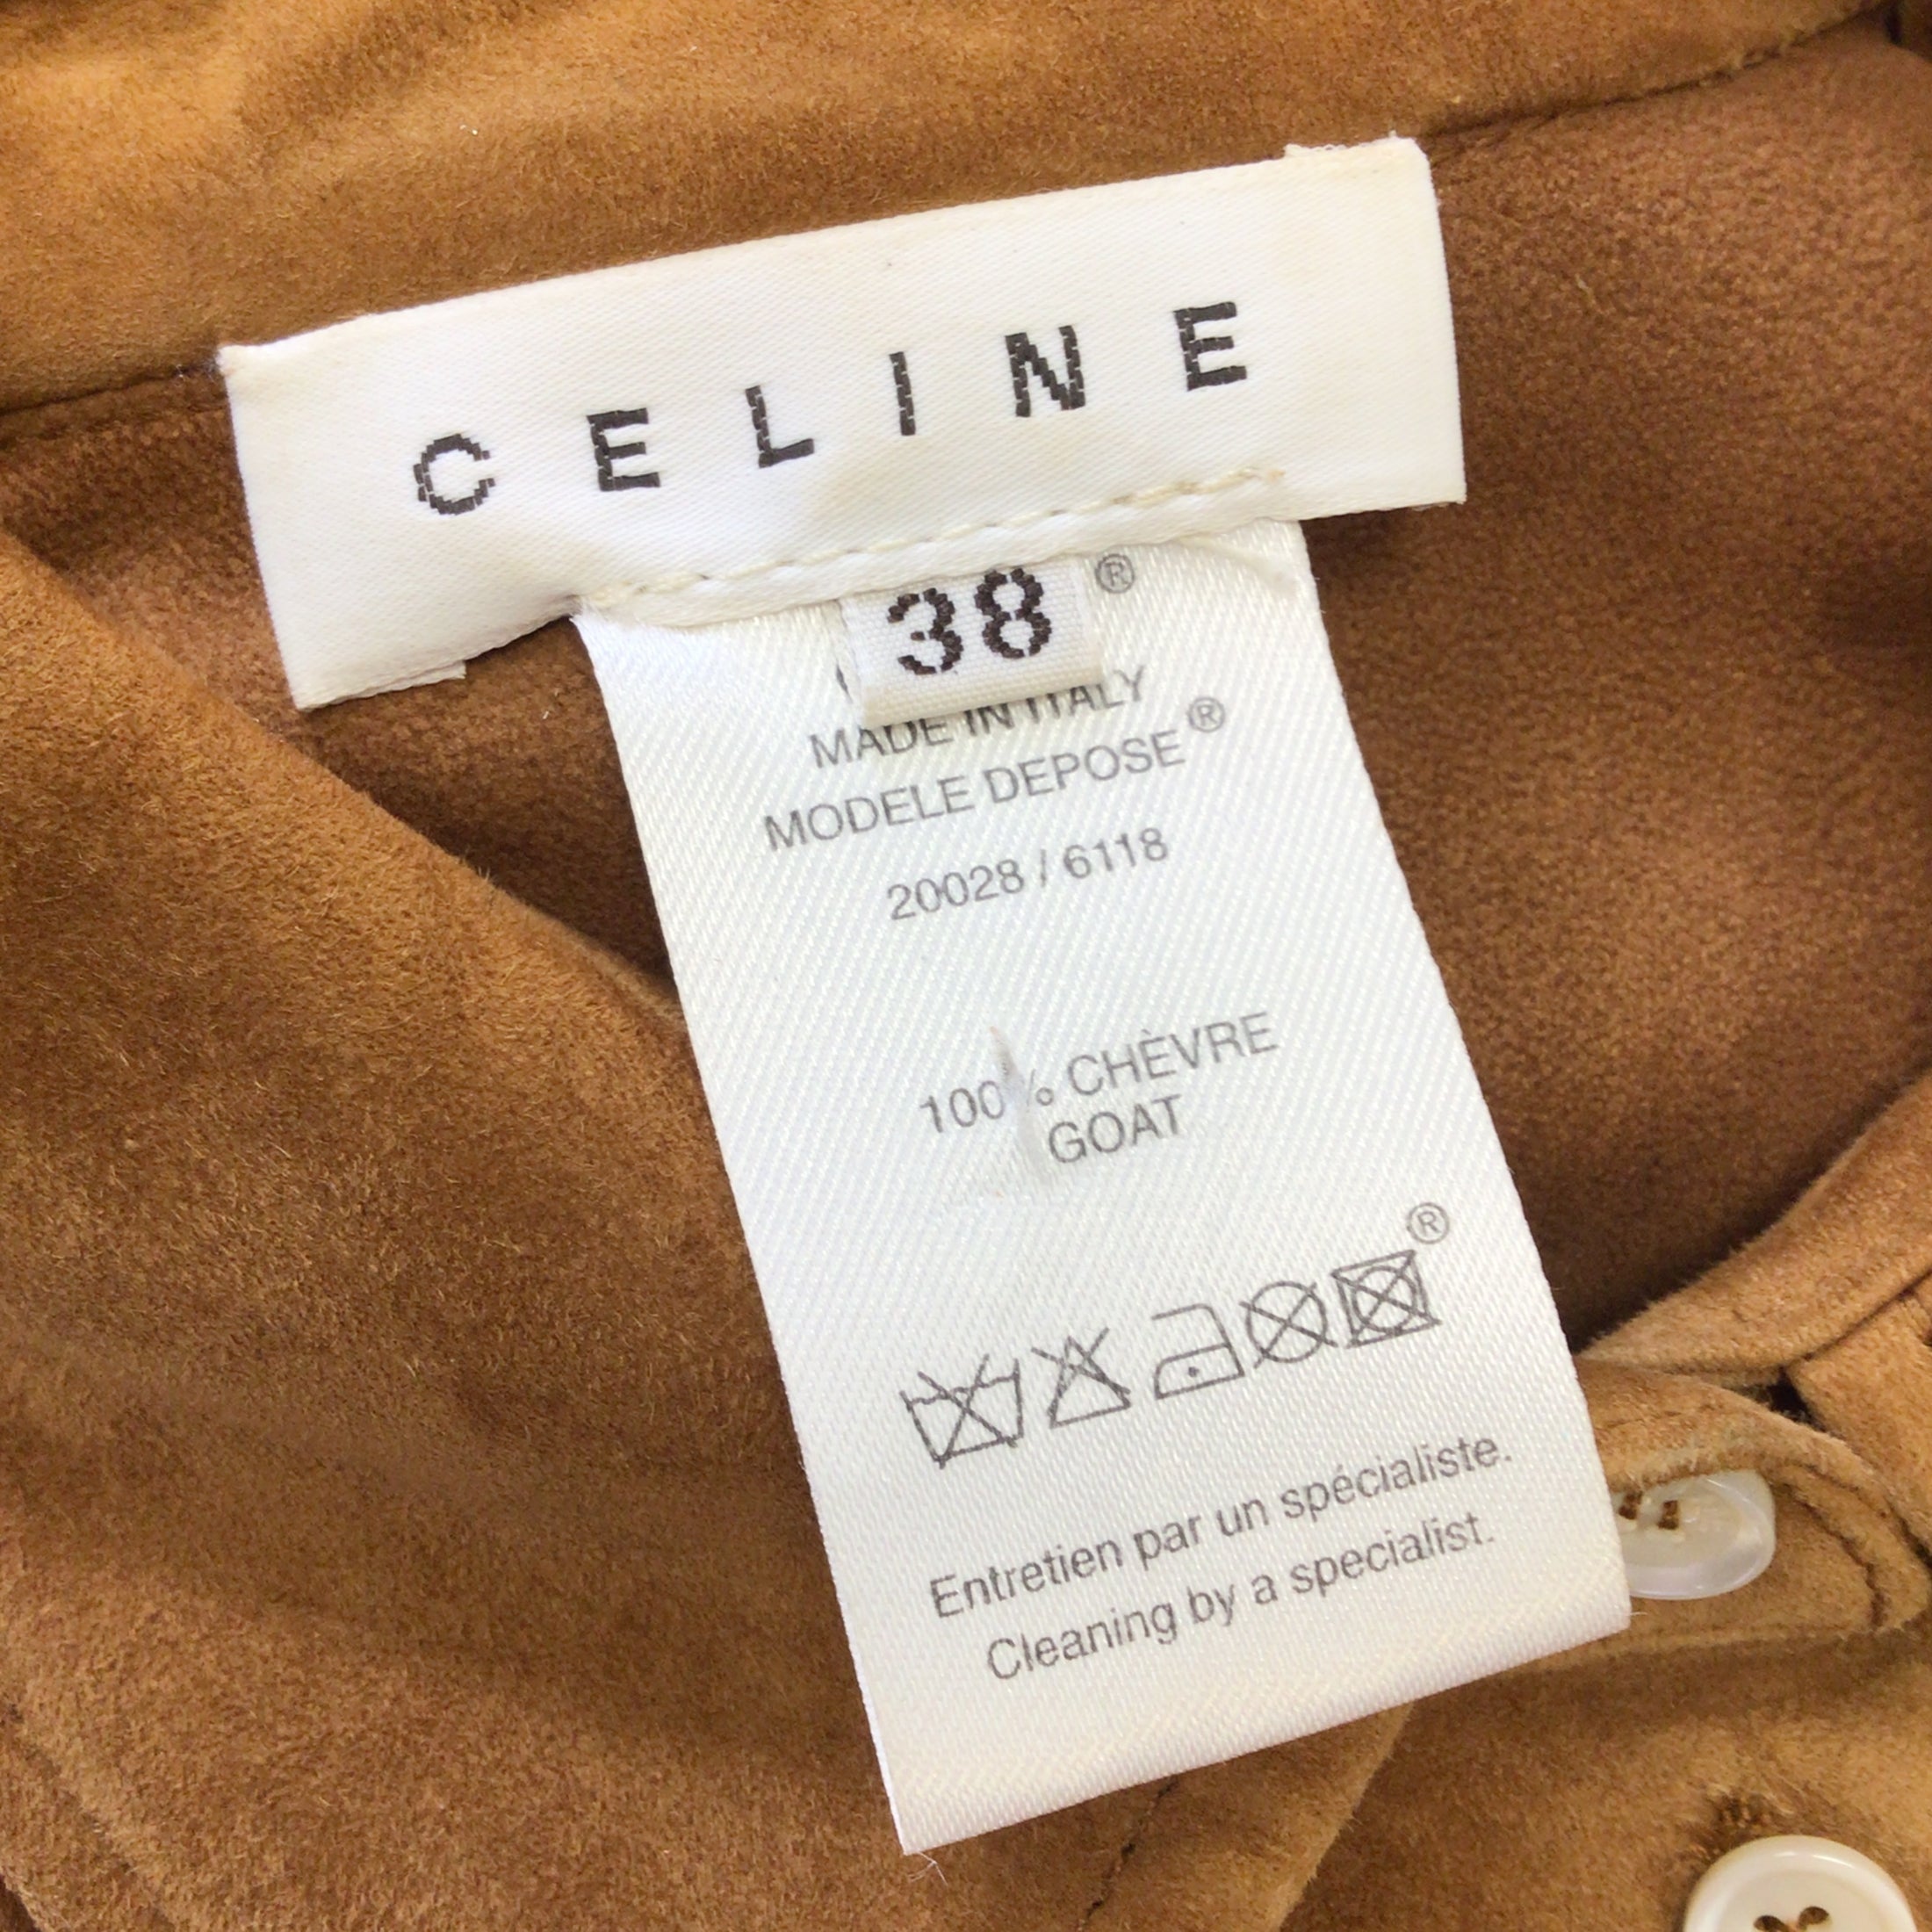 Celine Tan Vintage Ruffled Cuff Button-Front Goatskin Suede Leather Jacket